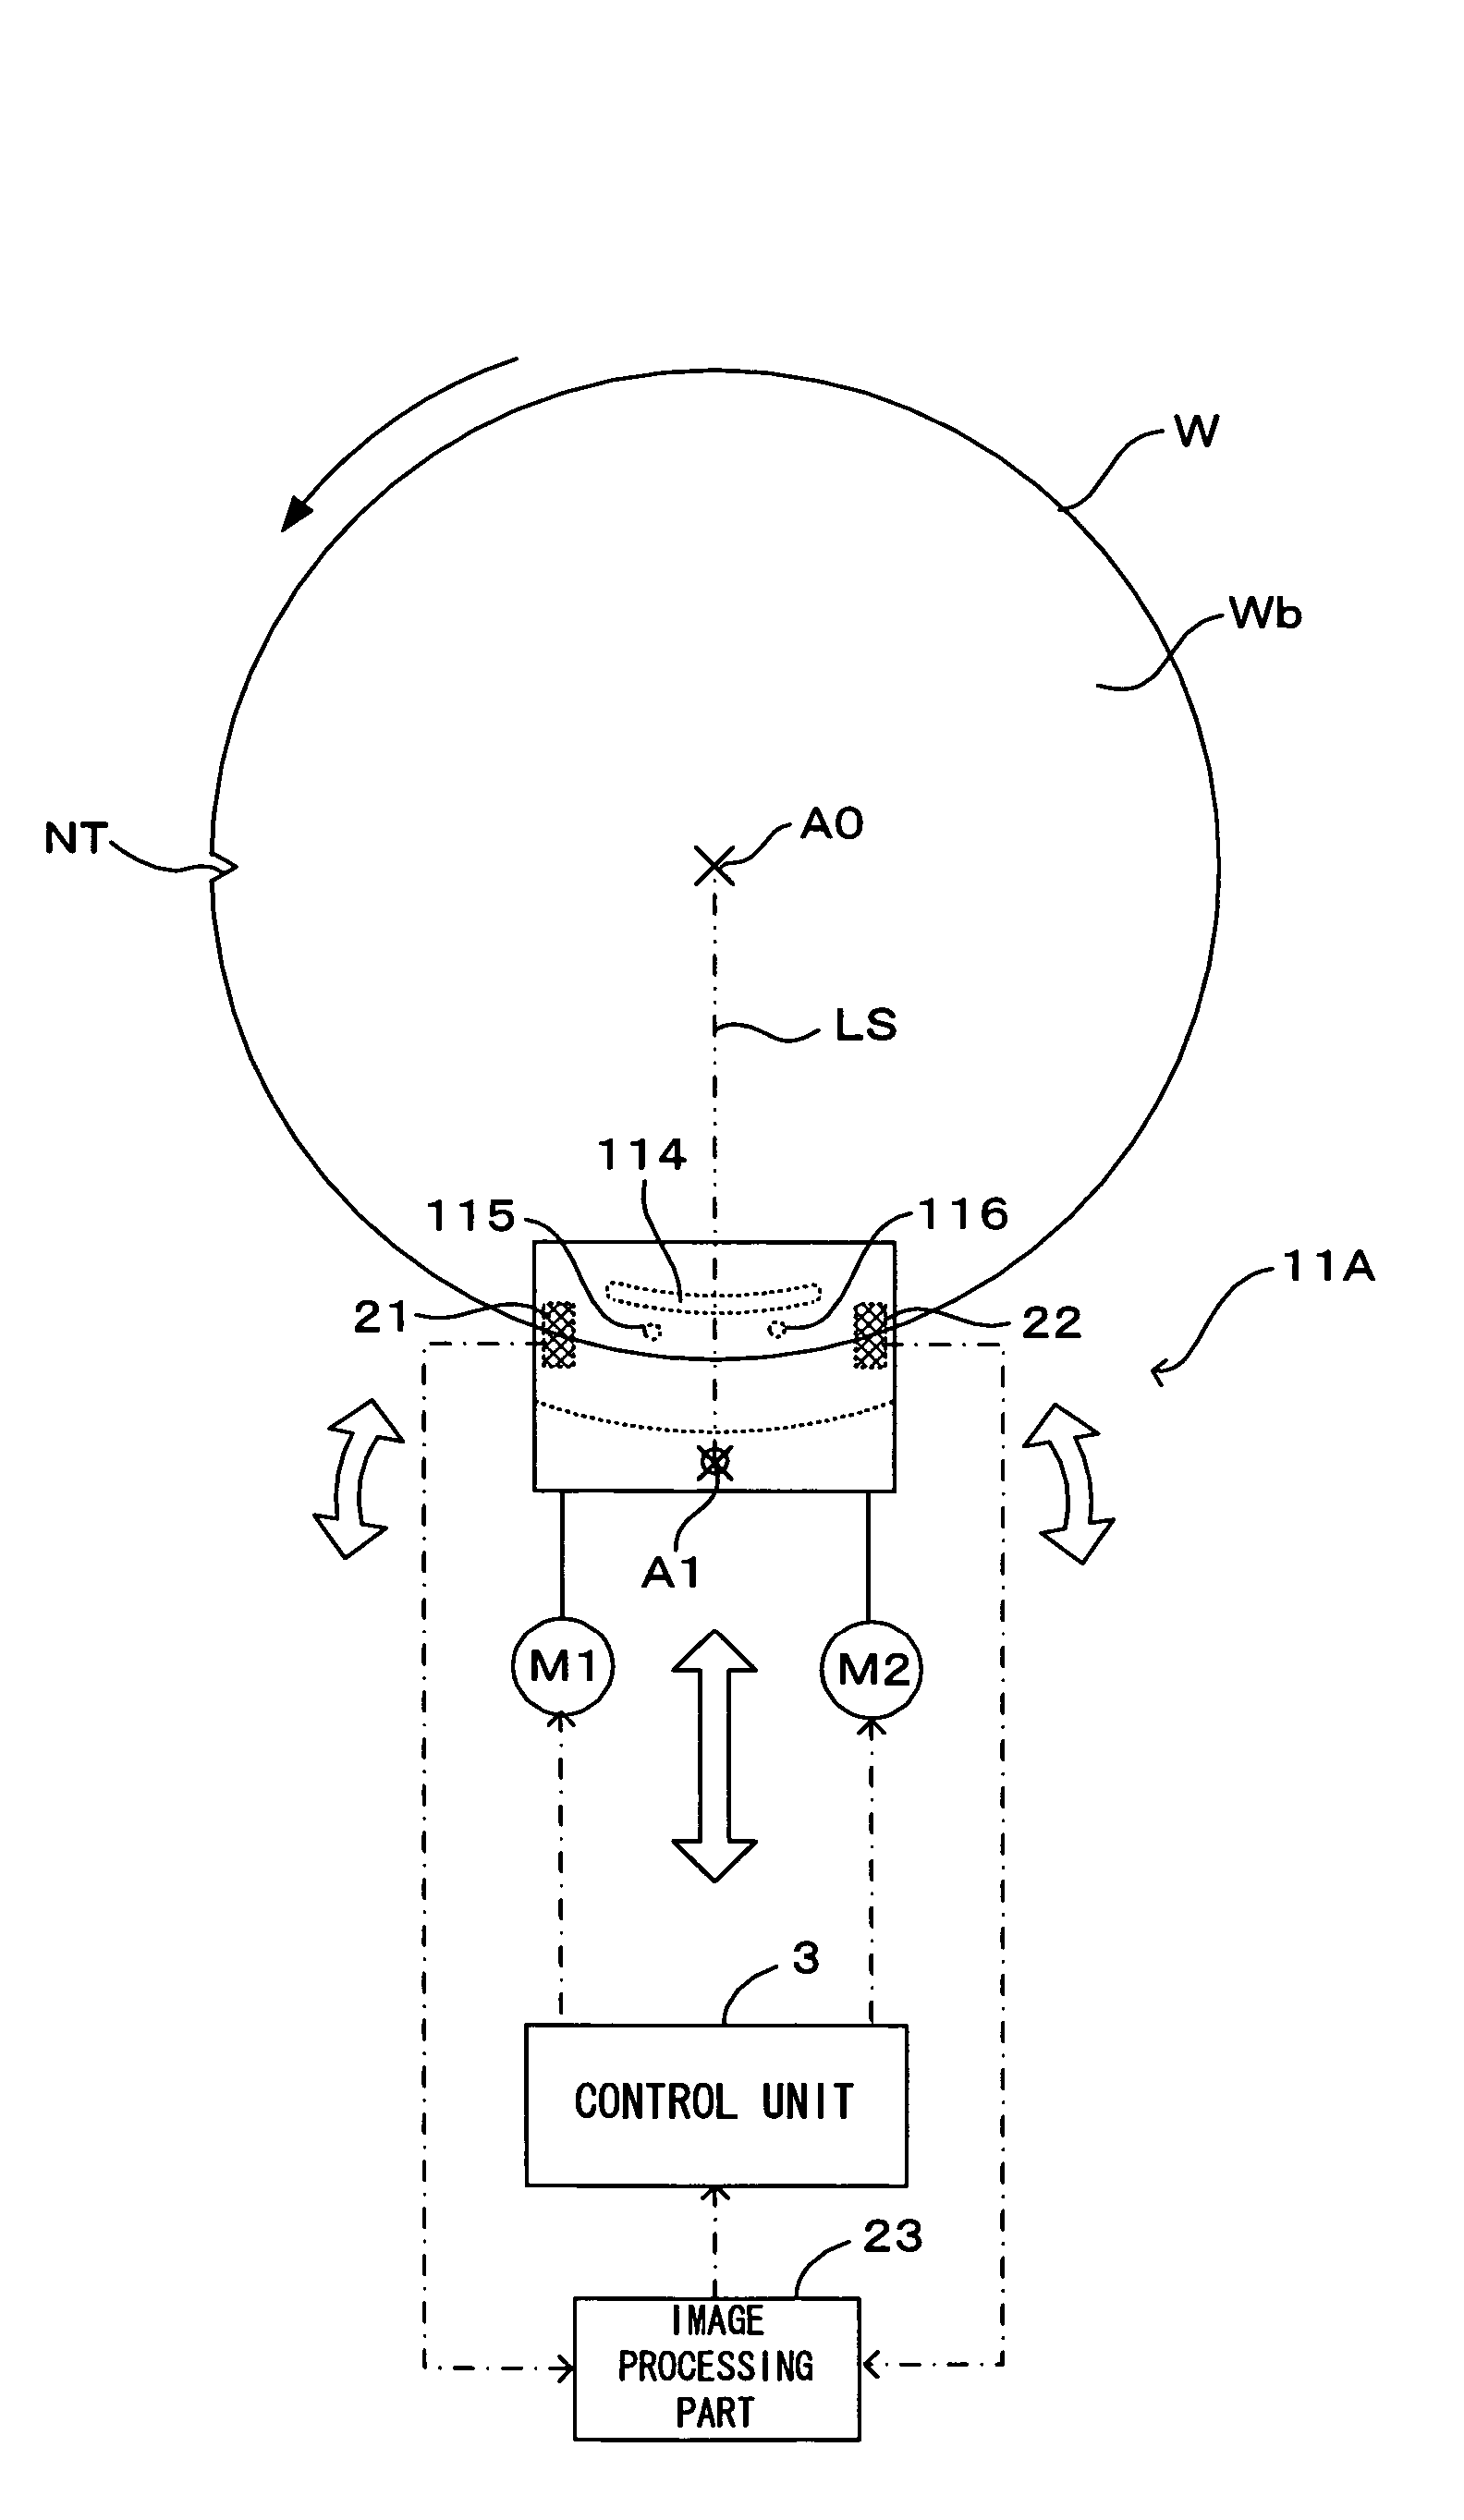 Substrate processing apparatus for treating substrate with predetermined processing by supplying processing liquid to rim portion of rotating substrate